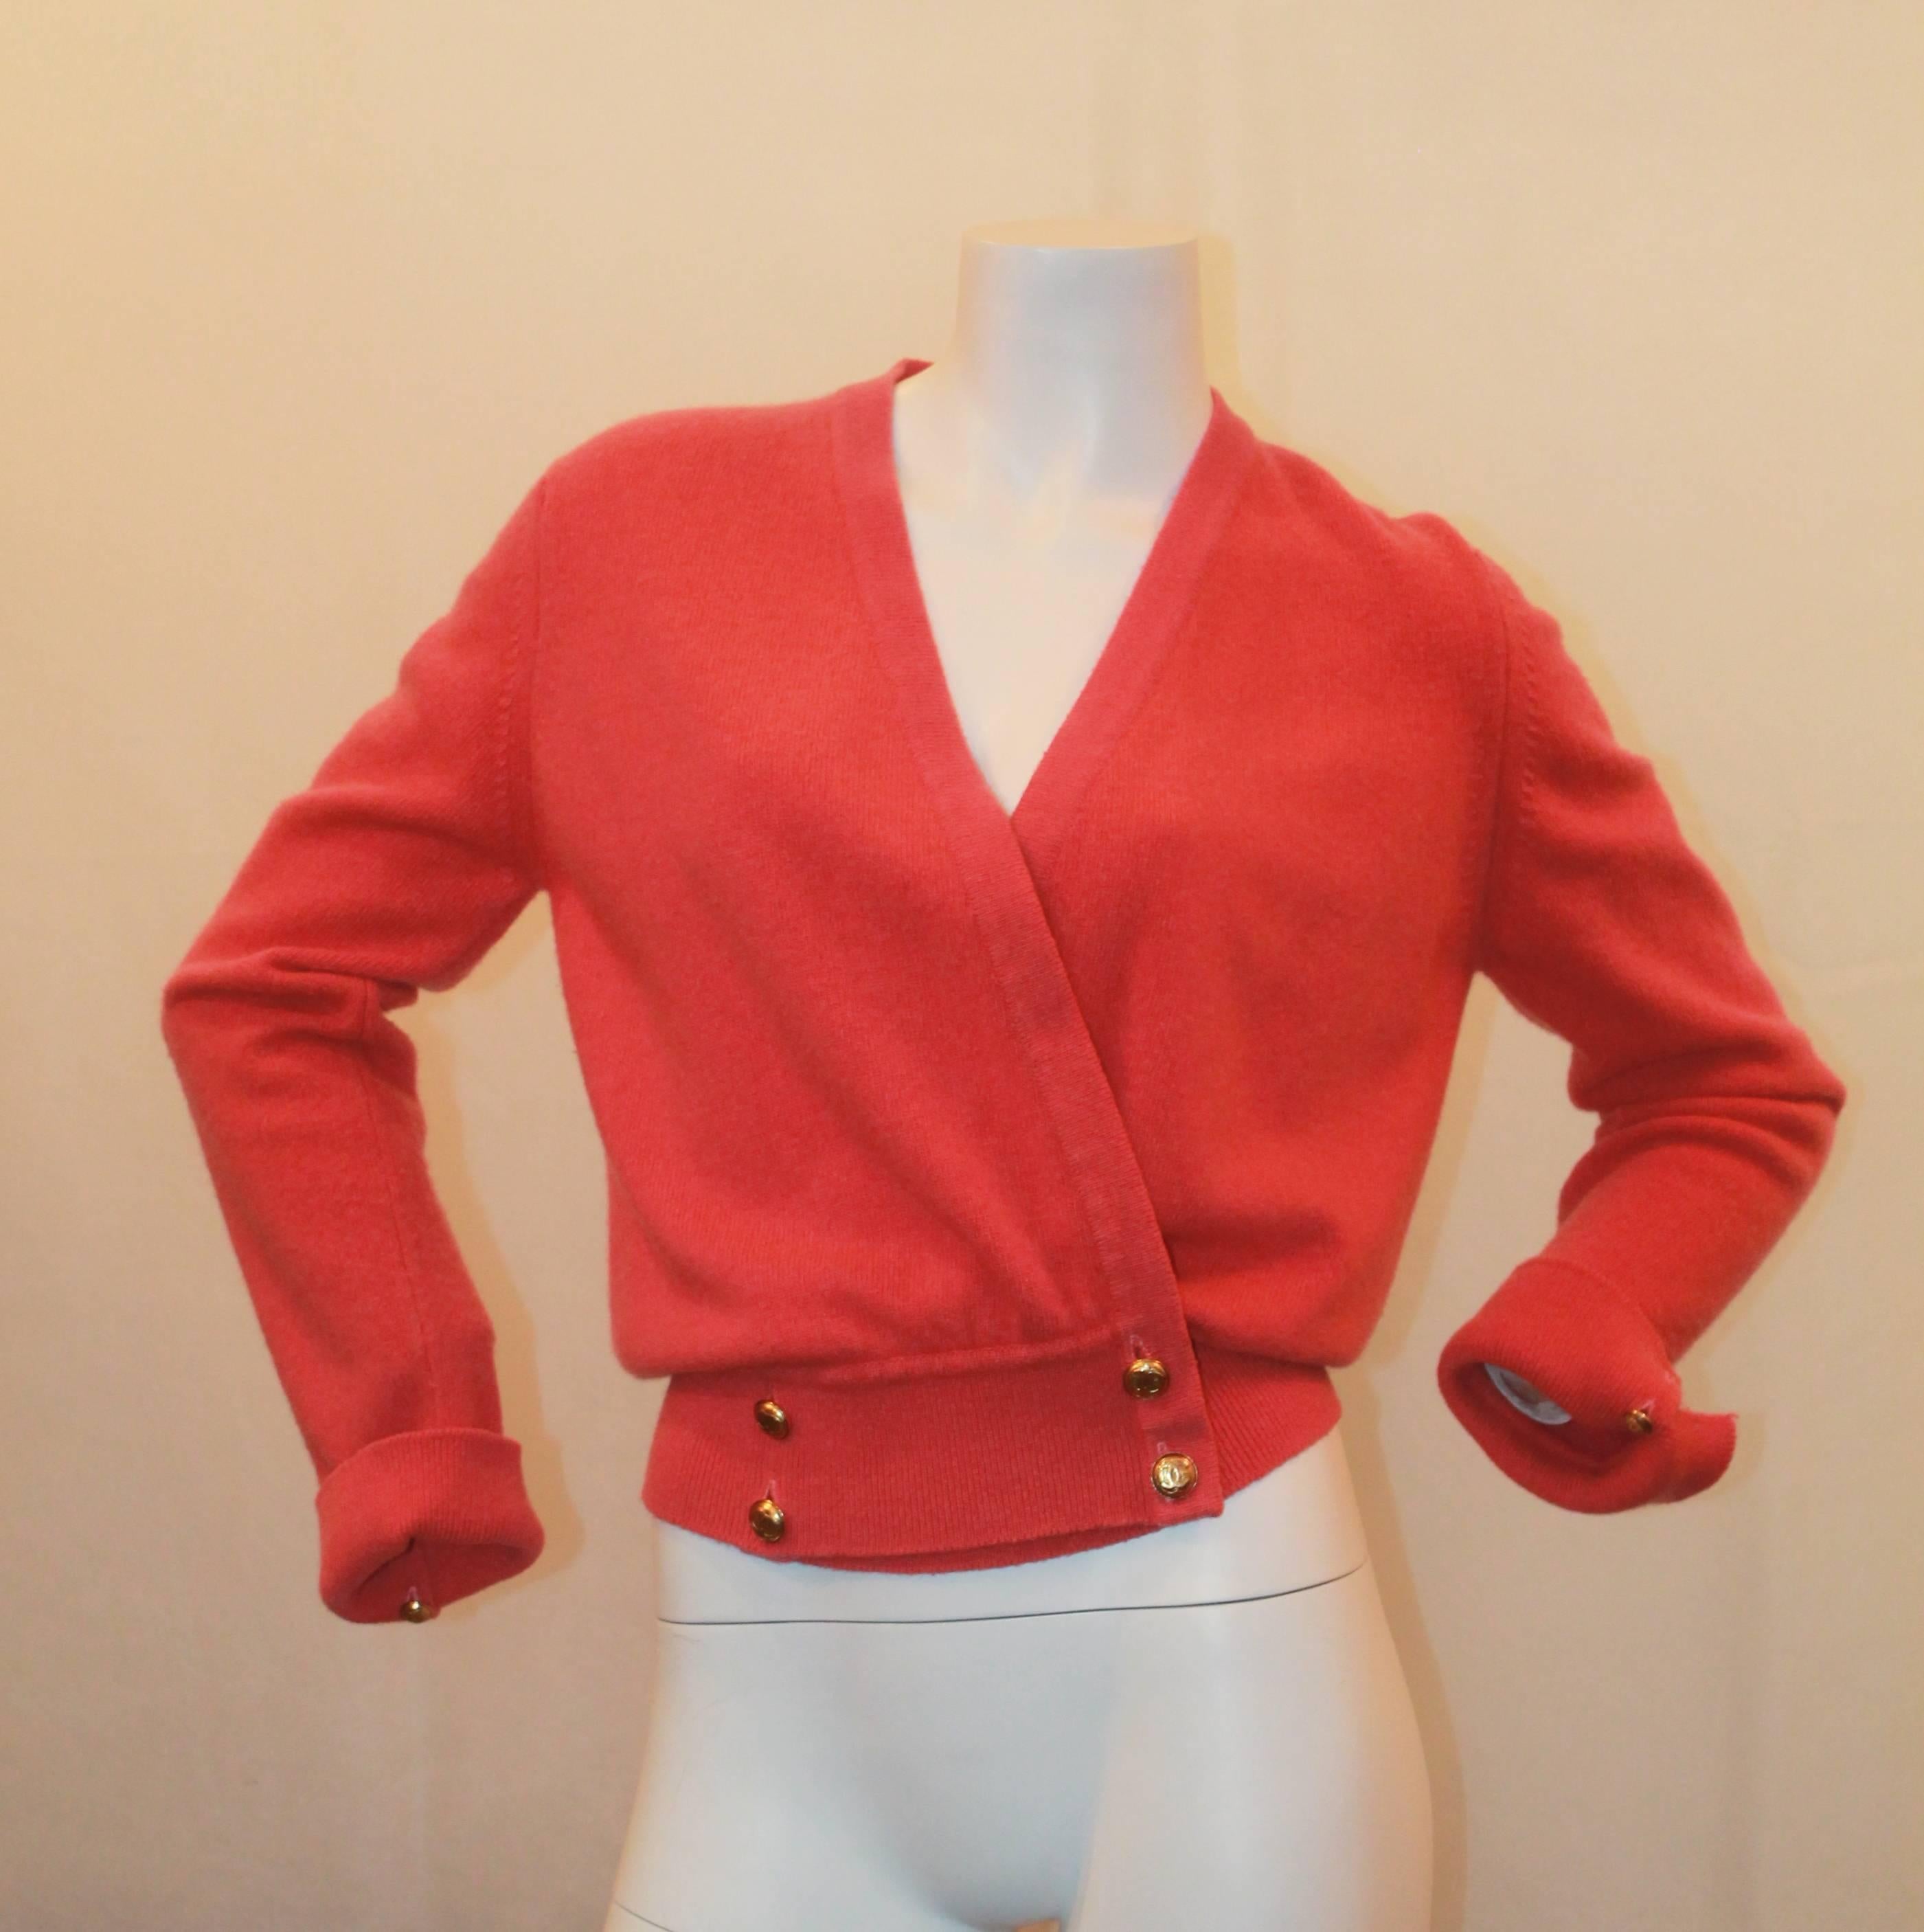 Chanel Vintage Coral Cashmere Cardigan w/ Cinched Bottom - circa 1980's - M.  This beautiful Chanel cardigan is in good vintage with pilling visible throughout.  It features a double breasted appearance, gold 